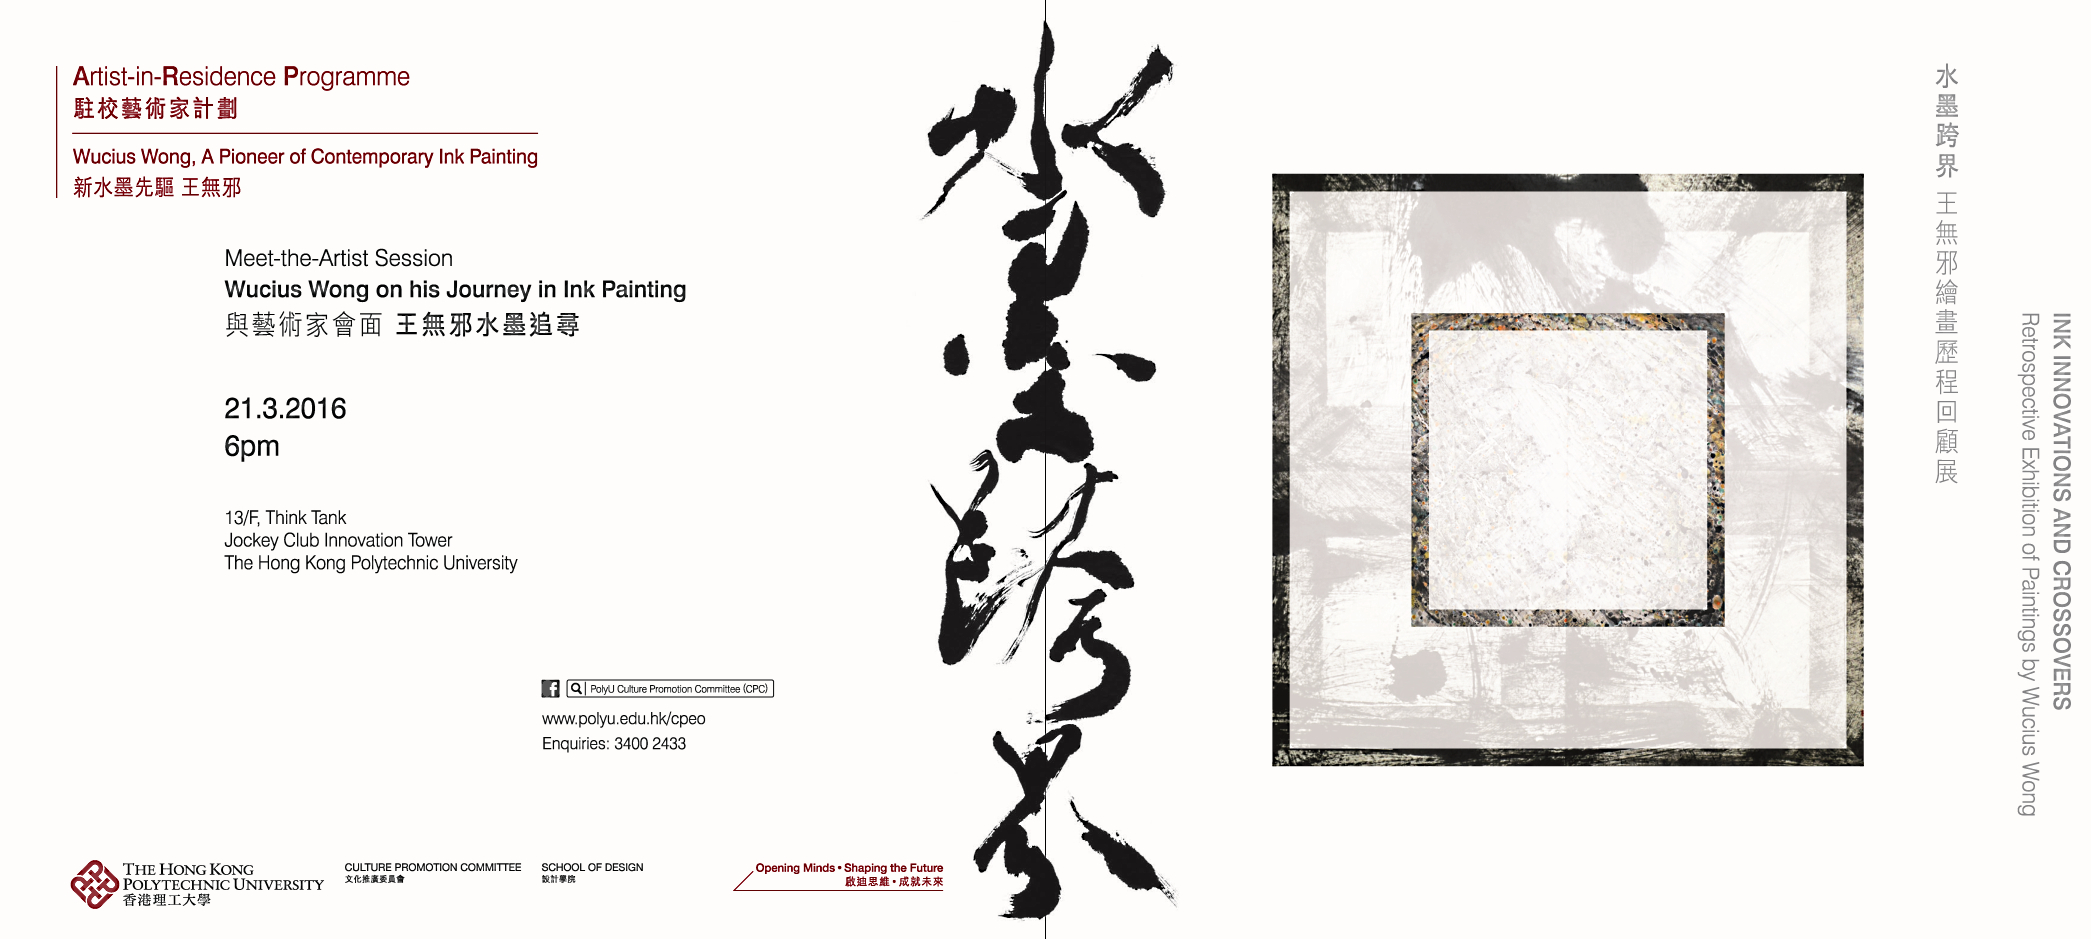 Wucius Wong, A Pioneer of Contemporary Ink Painting -- [Programme Overview]